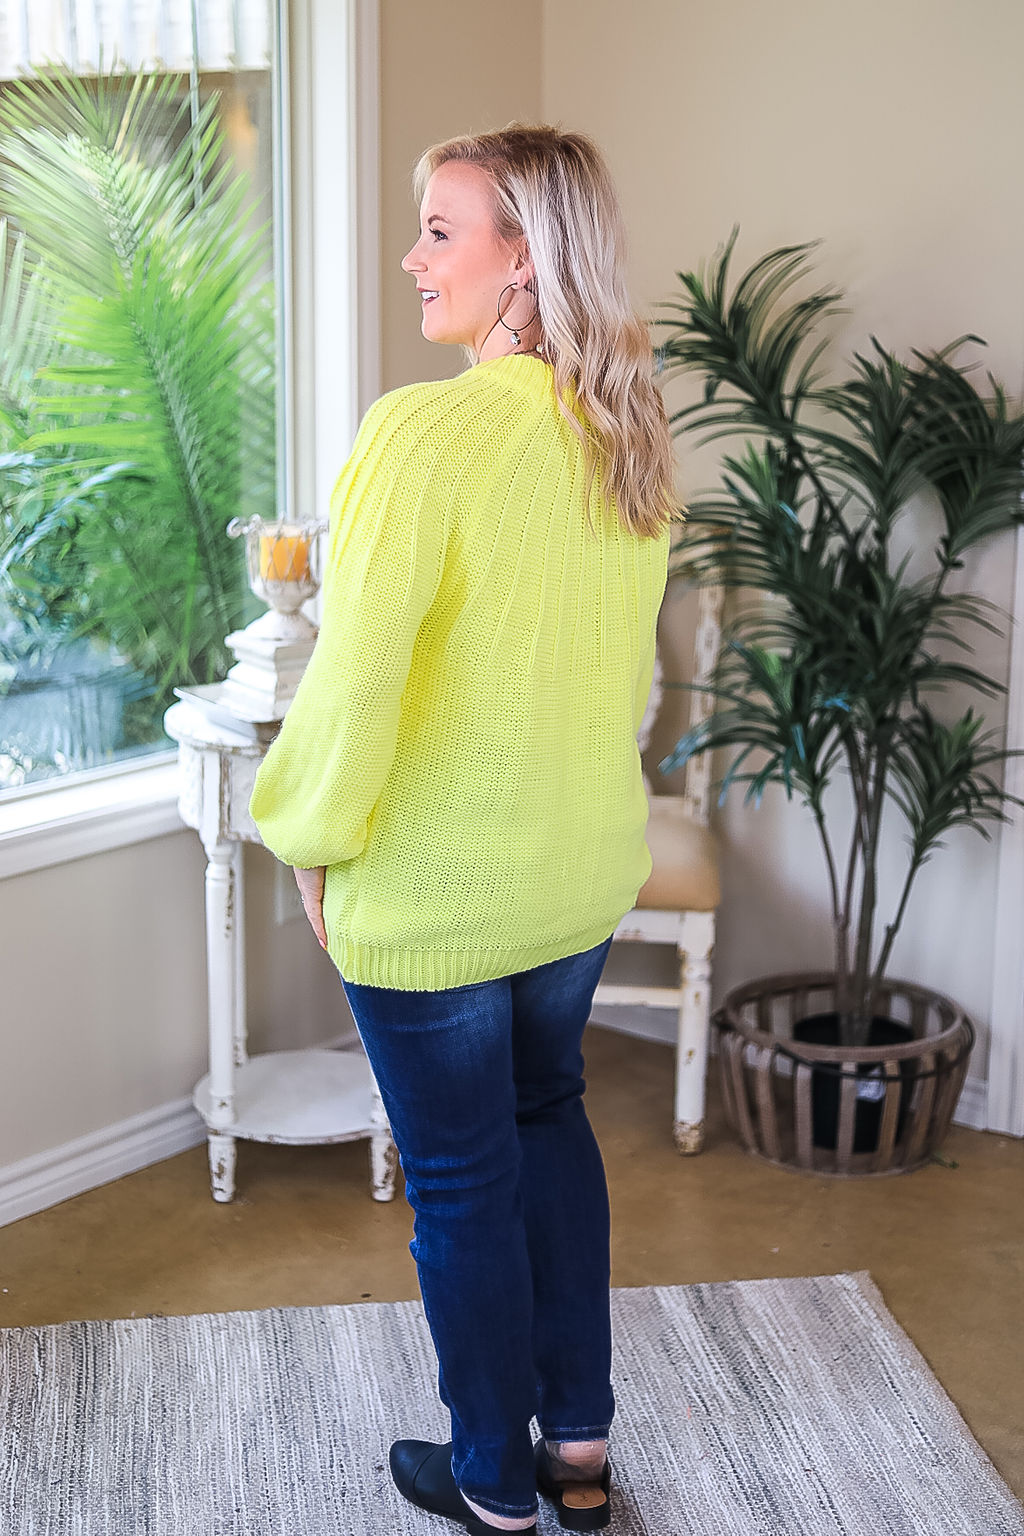 Bright Lights Puff Sleeve Knit Pullover Sweater in Neon Yellow - Giddy Up Glamour Boutique